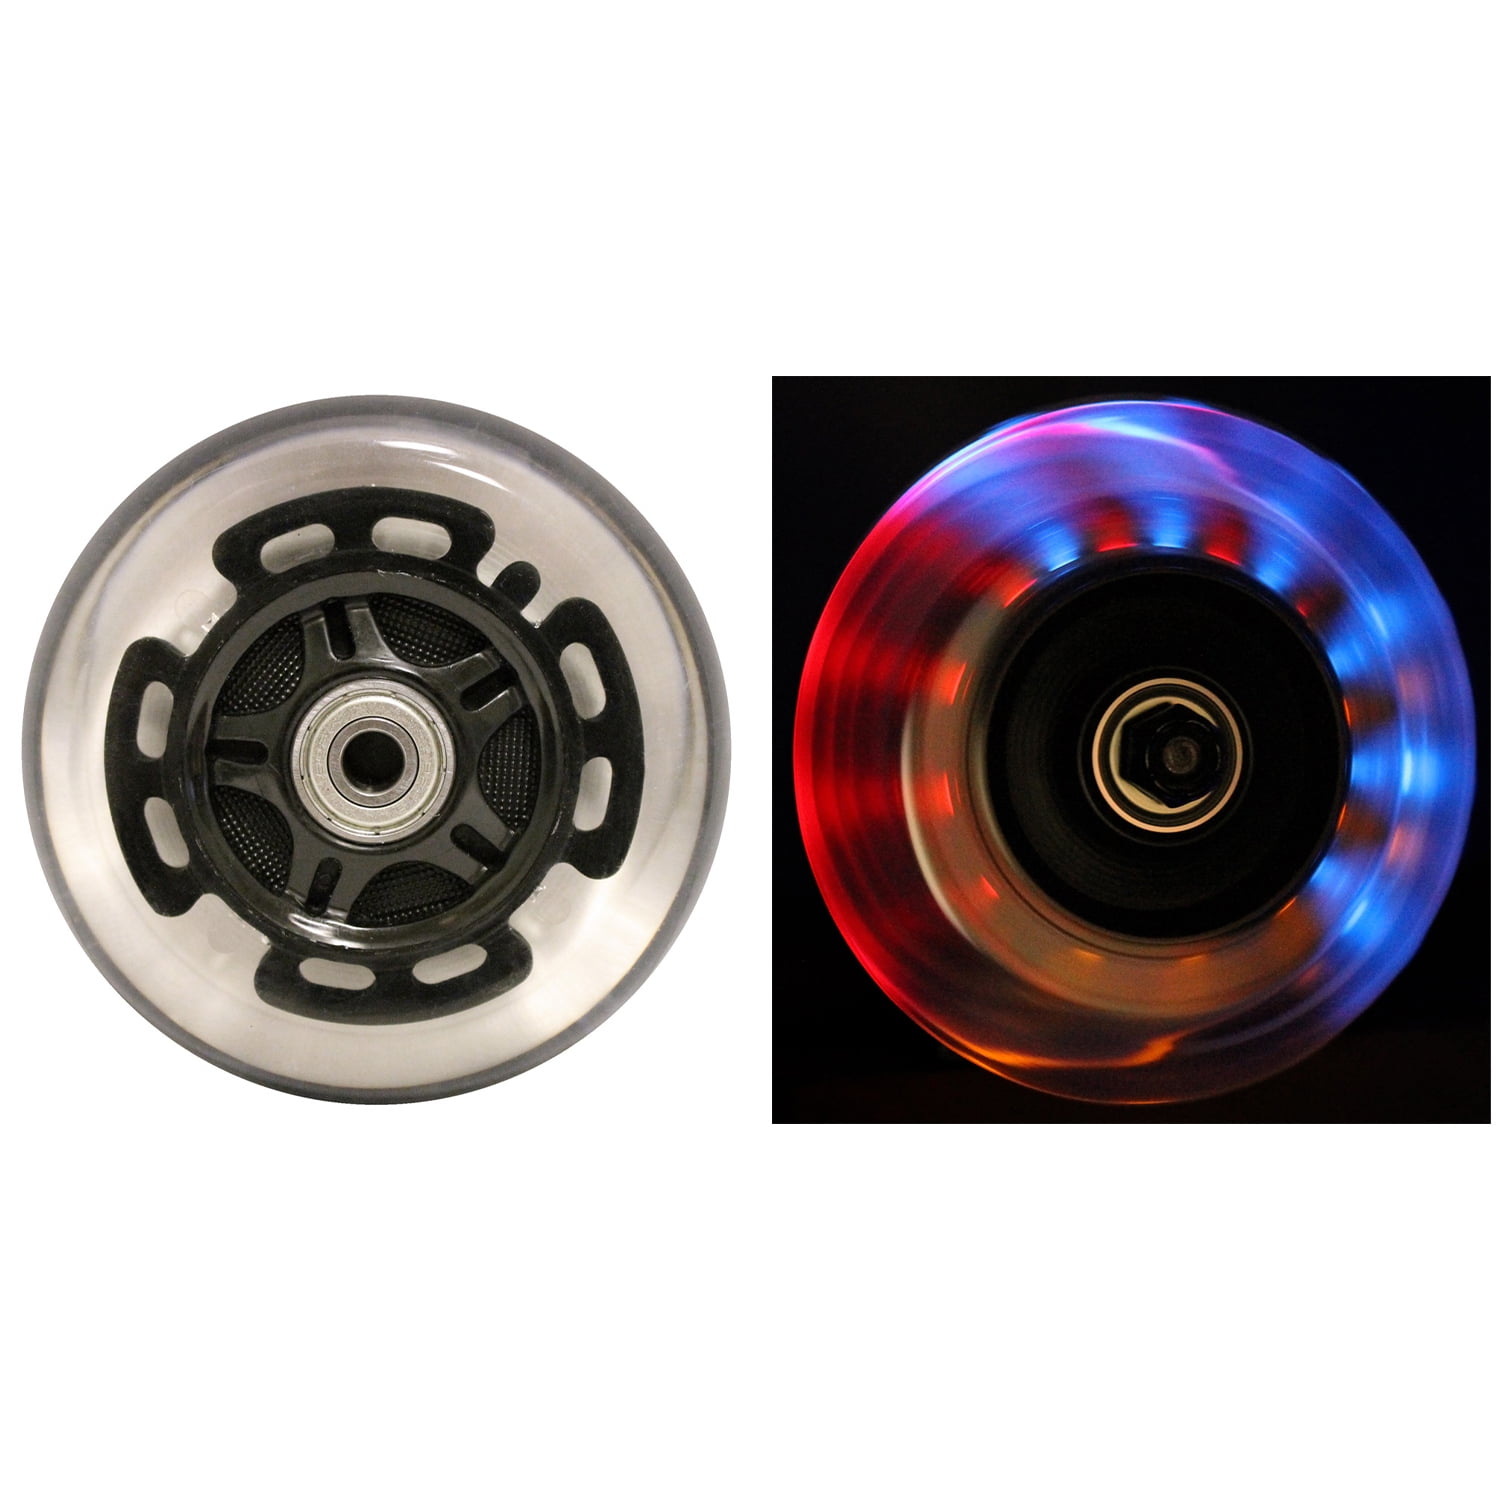 Here is The White/Grey Model from The Size is 100mm with a Durometer of 90a Bearings are Included. Kick Push This Listing is for a Set of Two Razor Scooter Wheels